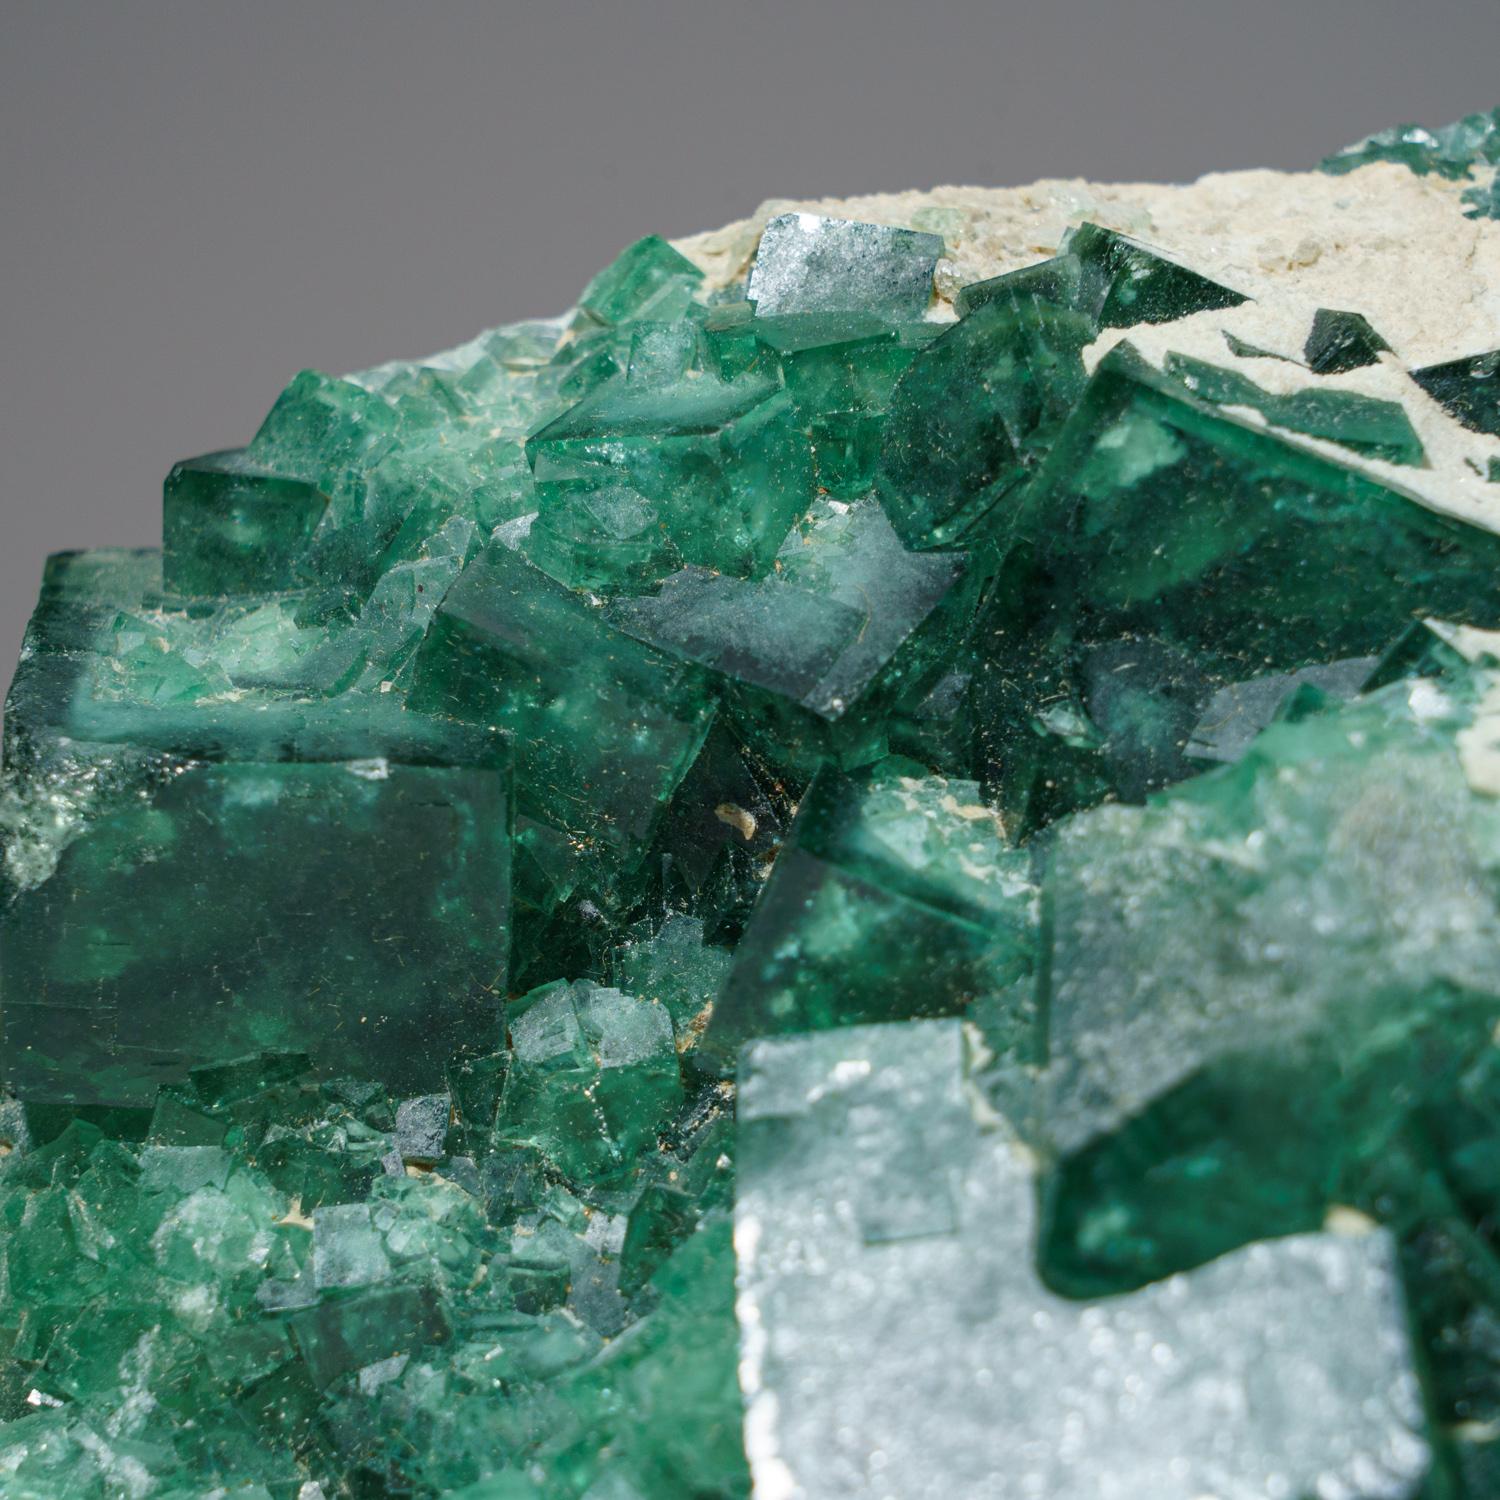 Transparent green cubic fluorite crystals with slightly textured crystal faces that are composed of microscopic octahedral faces. The bright green color is very good for this classic locality that usually produces darker purple-green fluorite.

